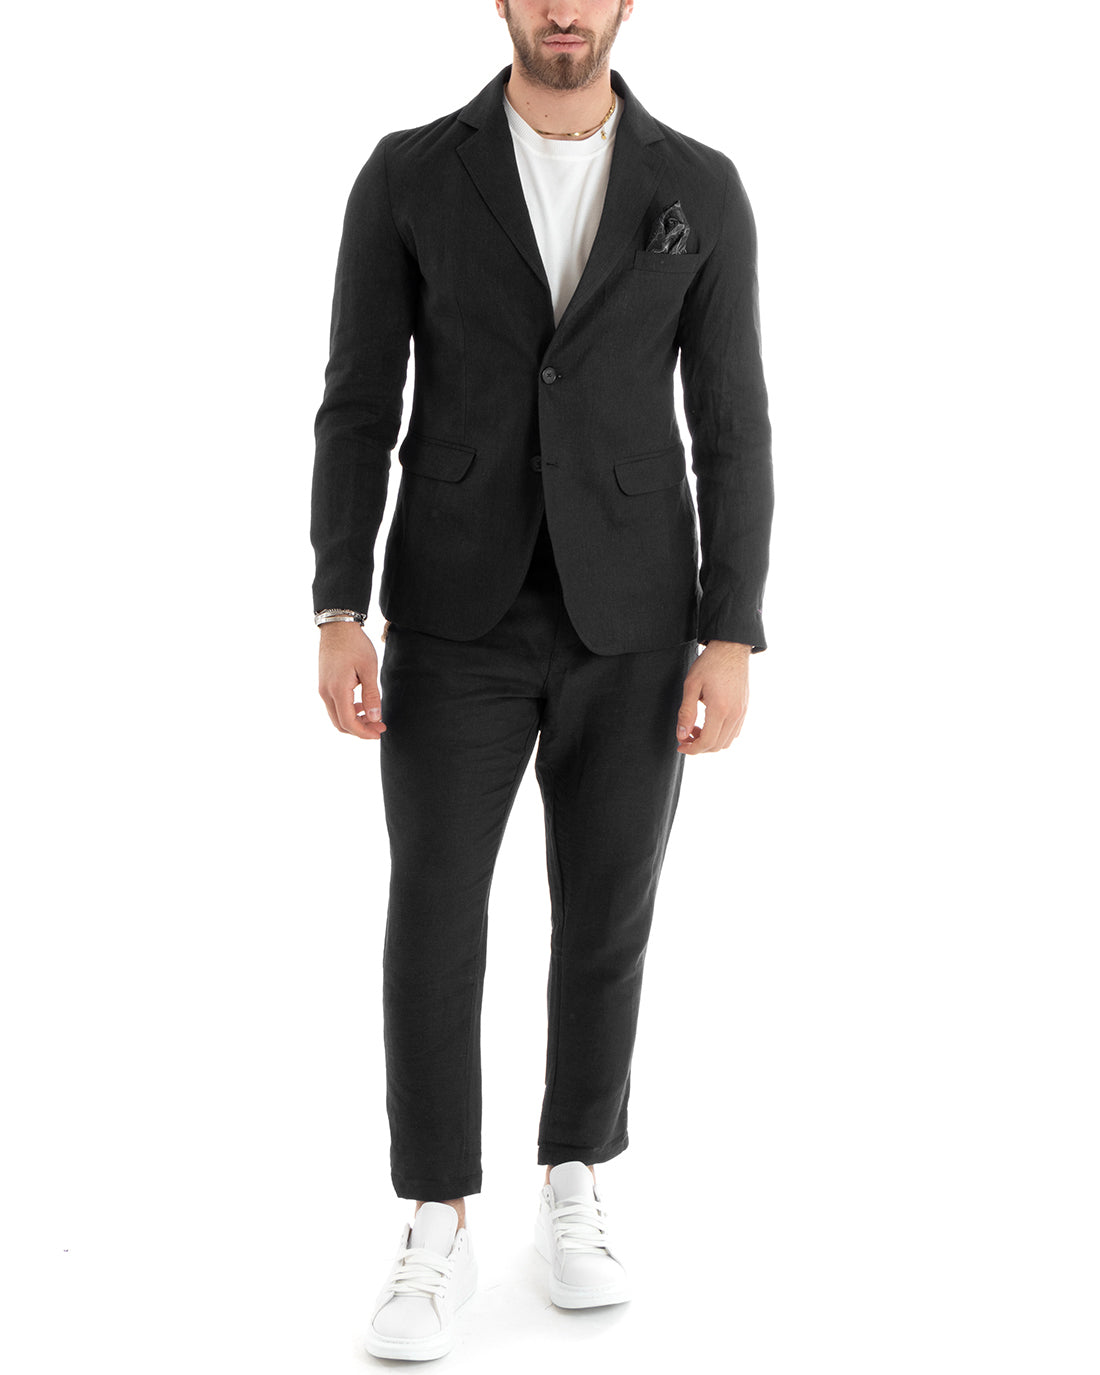 Single-breasted men's suit, tailored linen suit, jacket, trousers, solid color, black GIOSAL-OU2325A